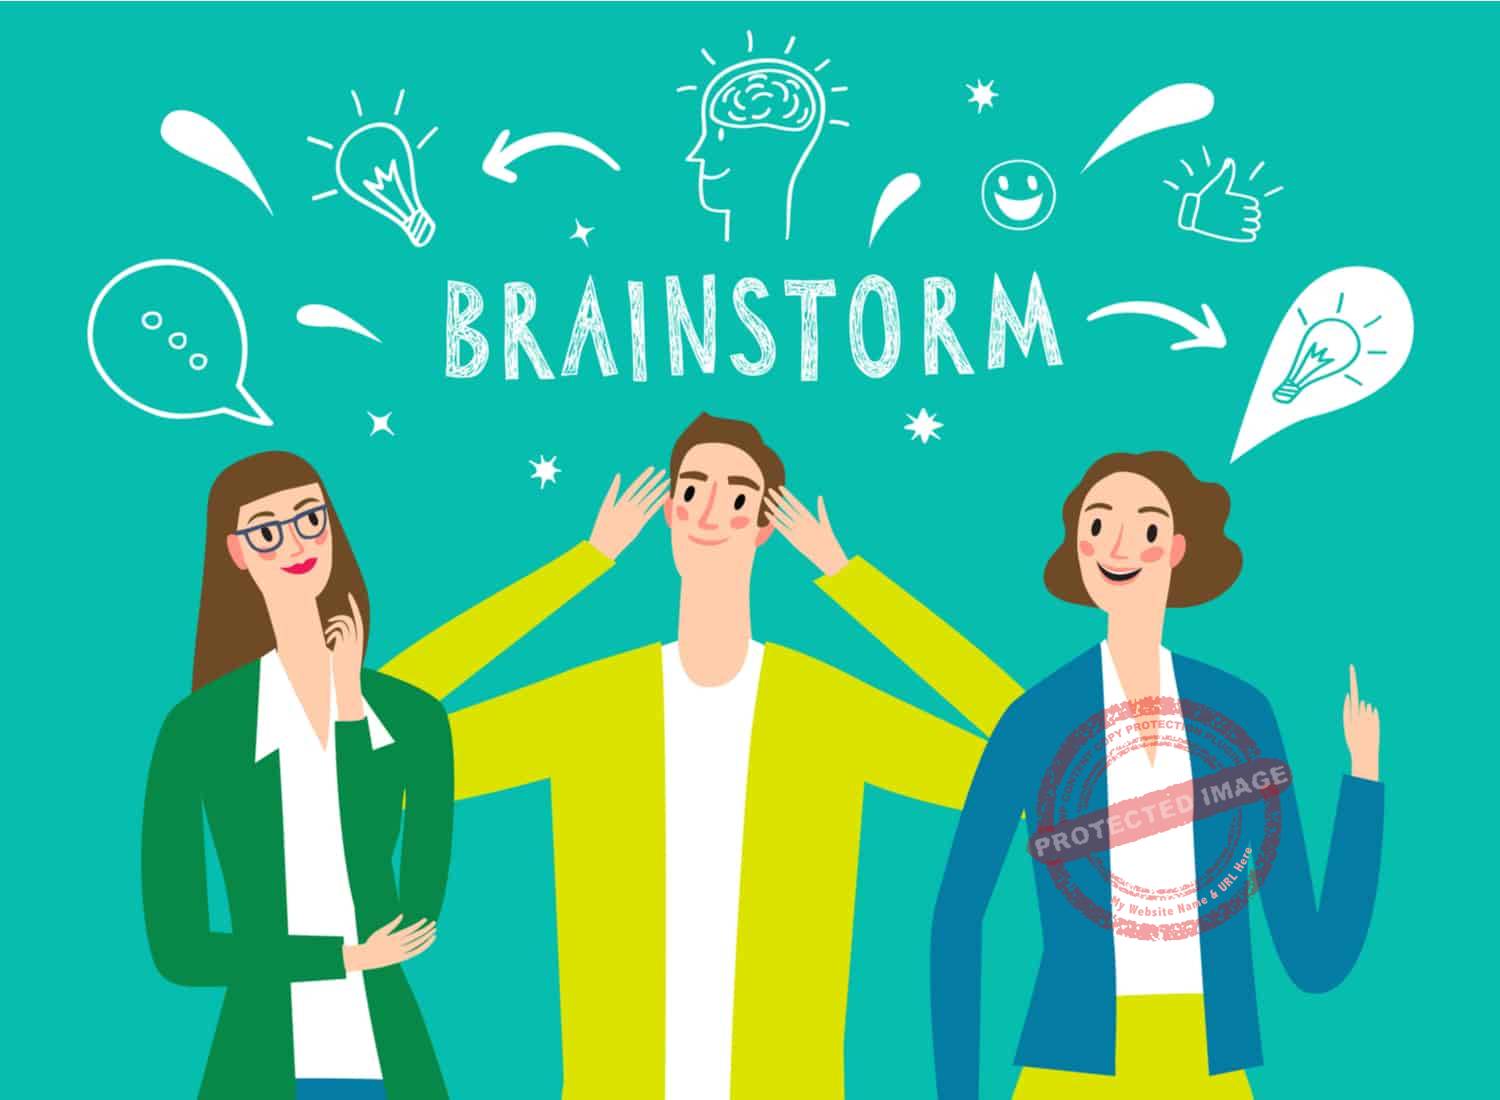 How To Brainstorm Business Ideas [20 Apt Tips]